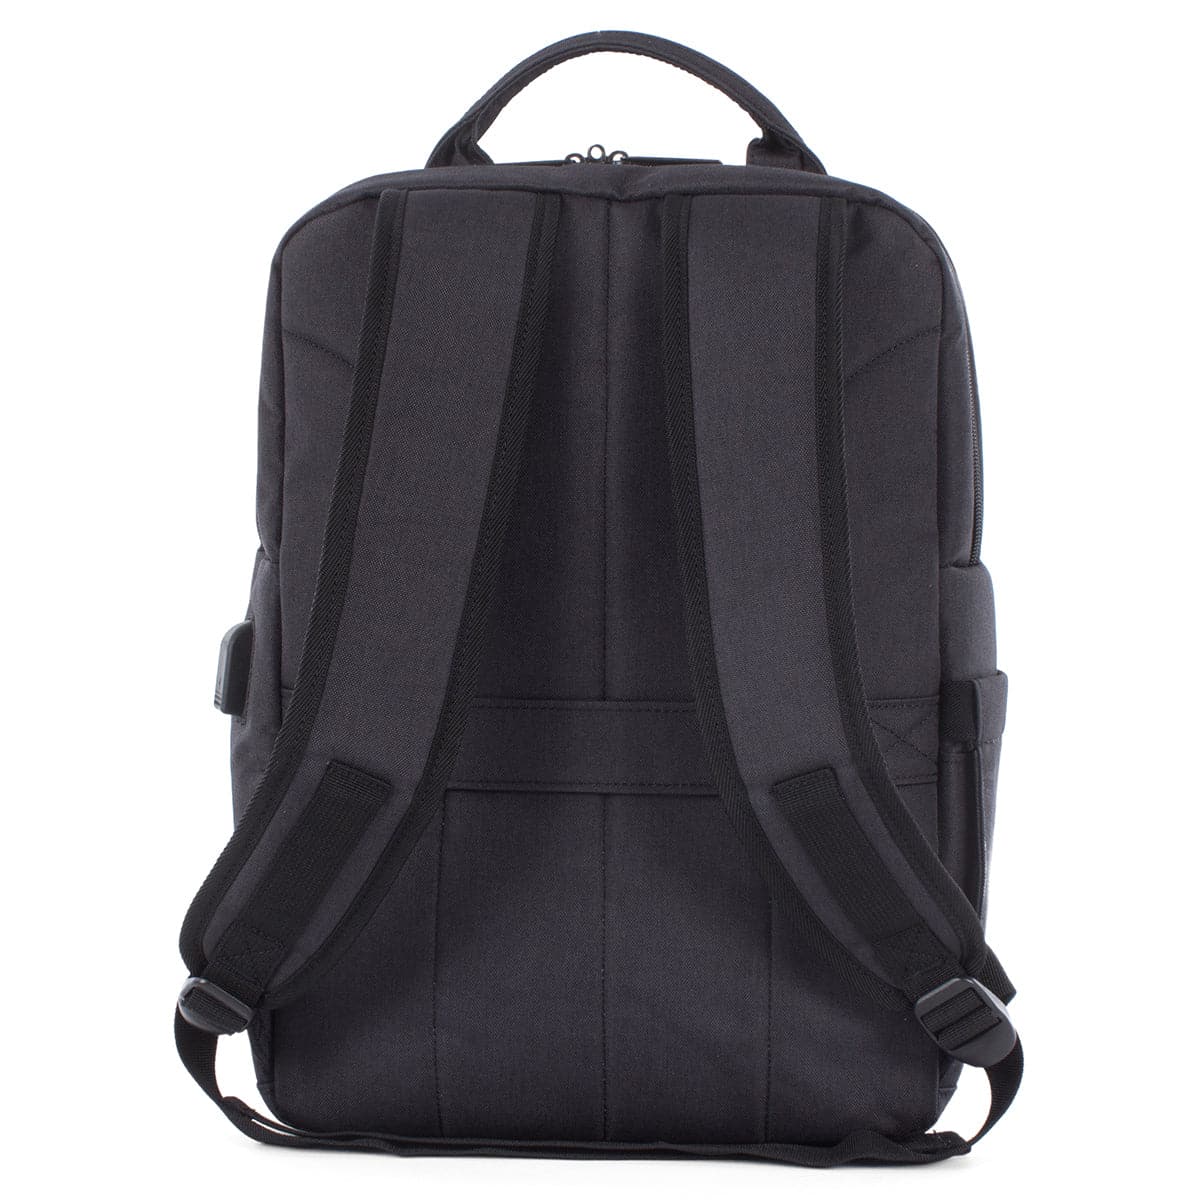 Swiss Mobility Cadence Backpack